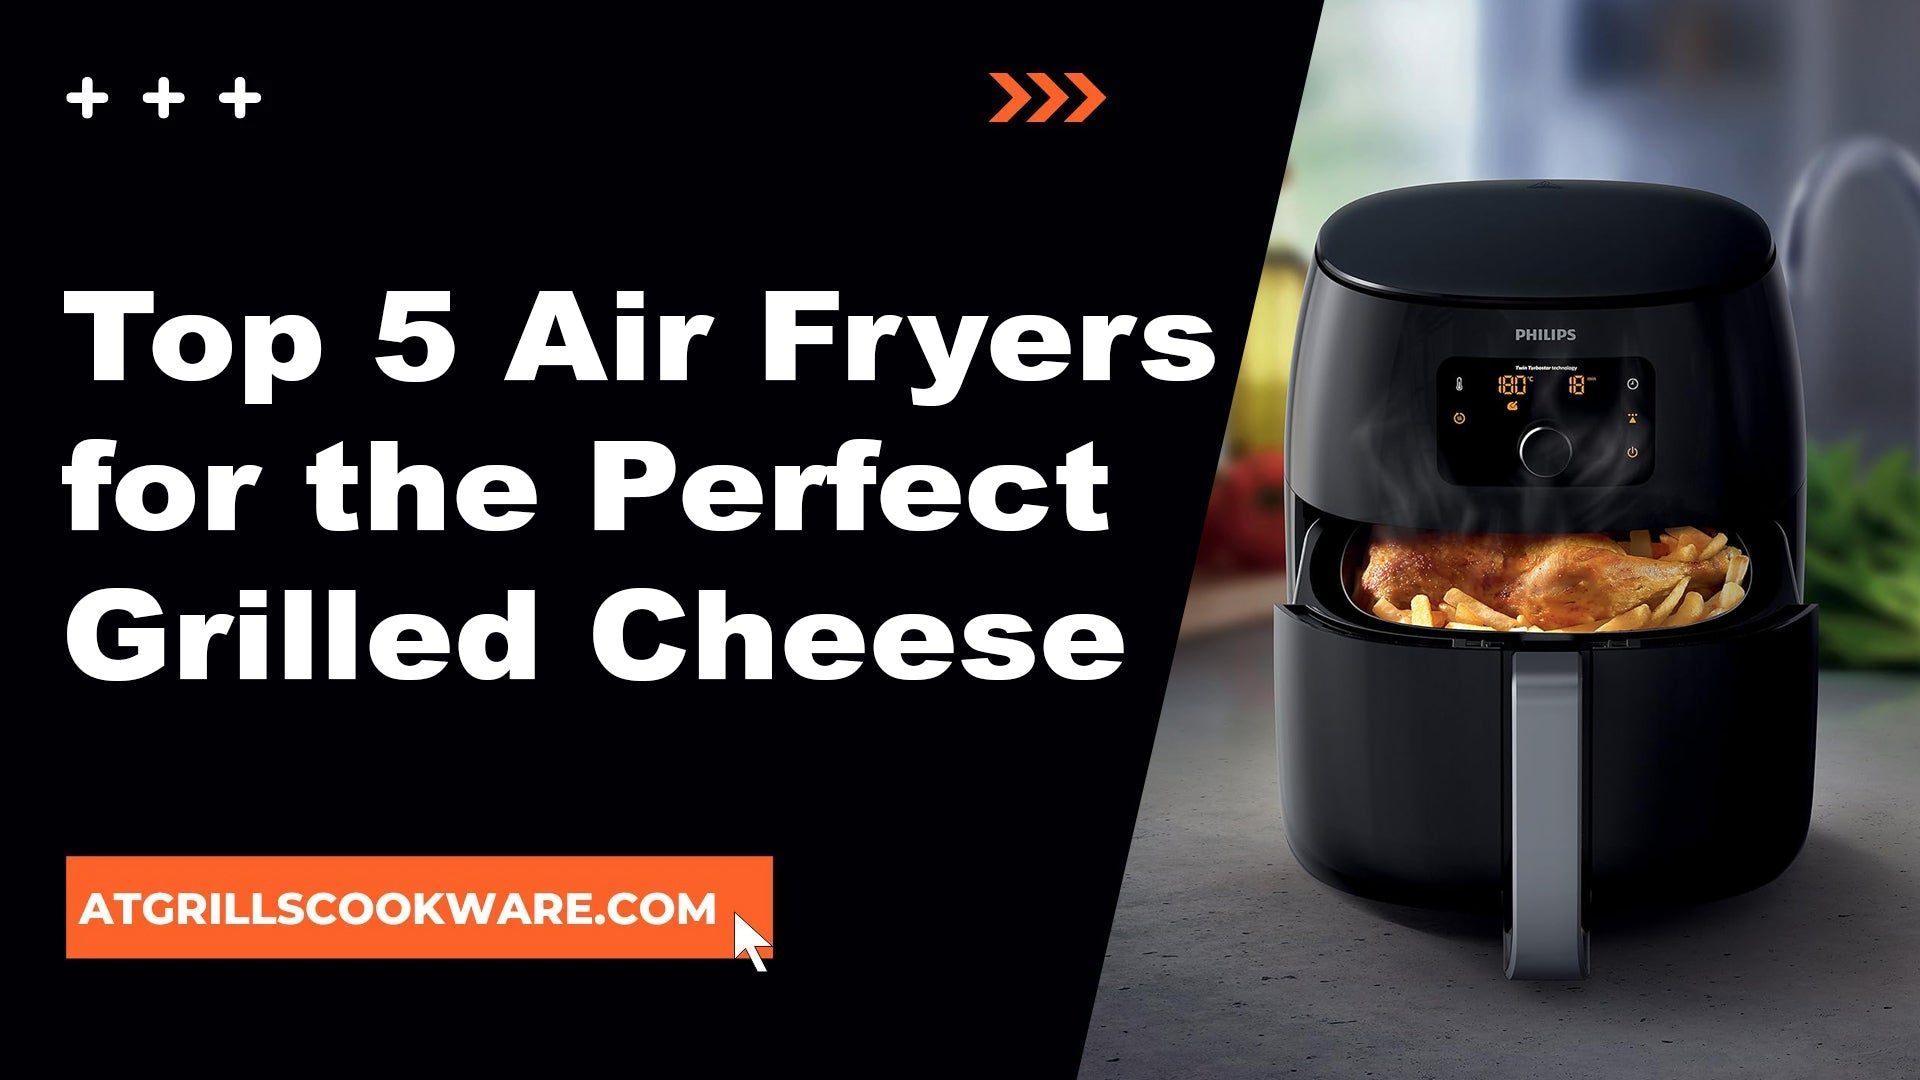 The Top 5 Air Fryers for the Perfect Grilled Cheese